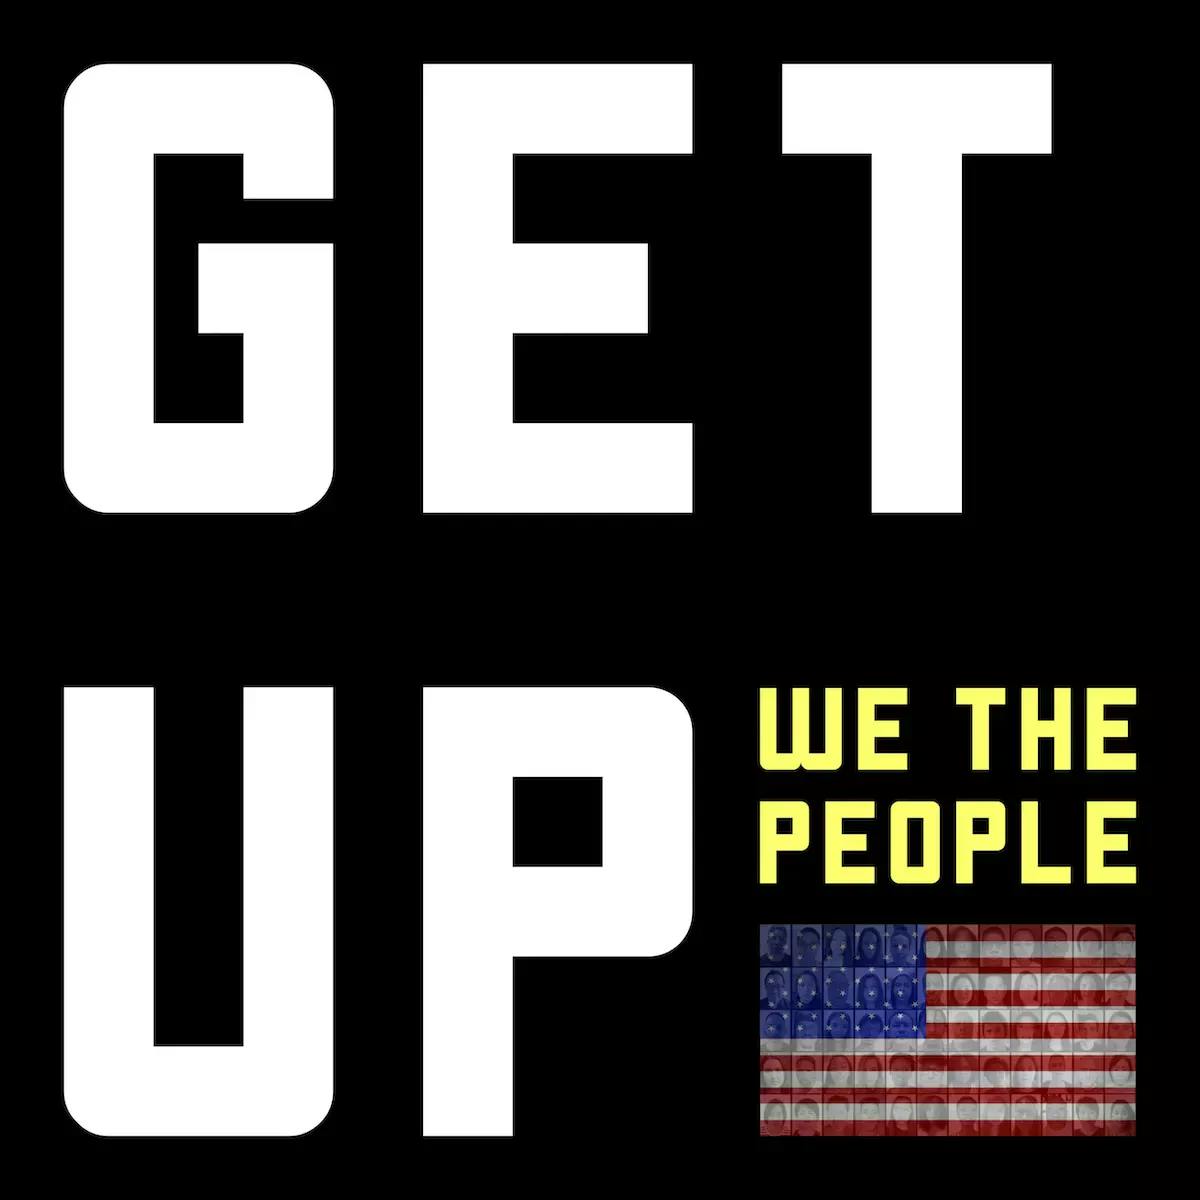 Black background with text "GET UP WE THE PEOPLE" and an American flag in the right corner